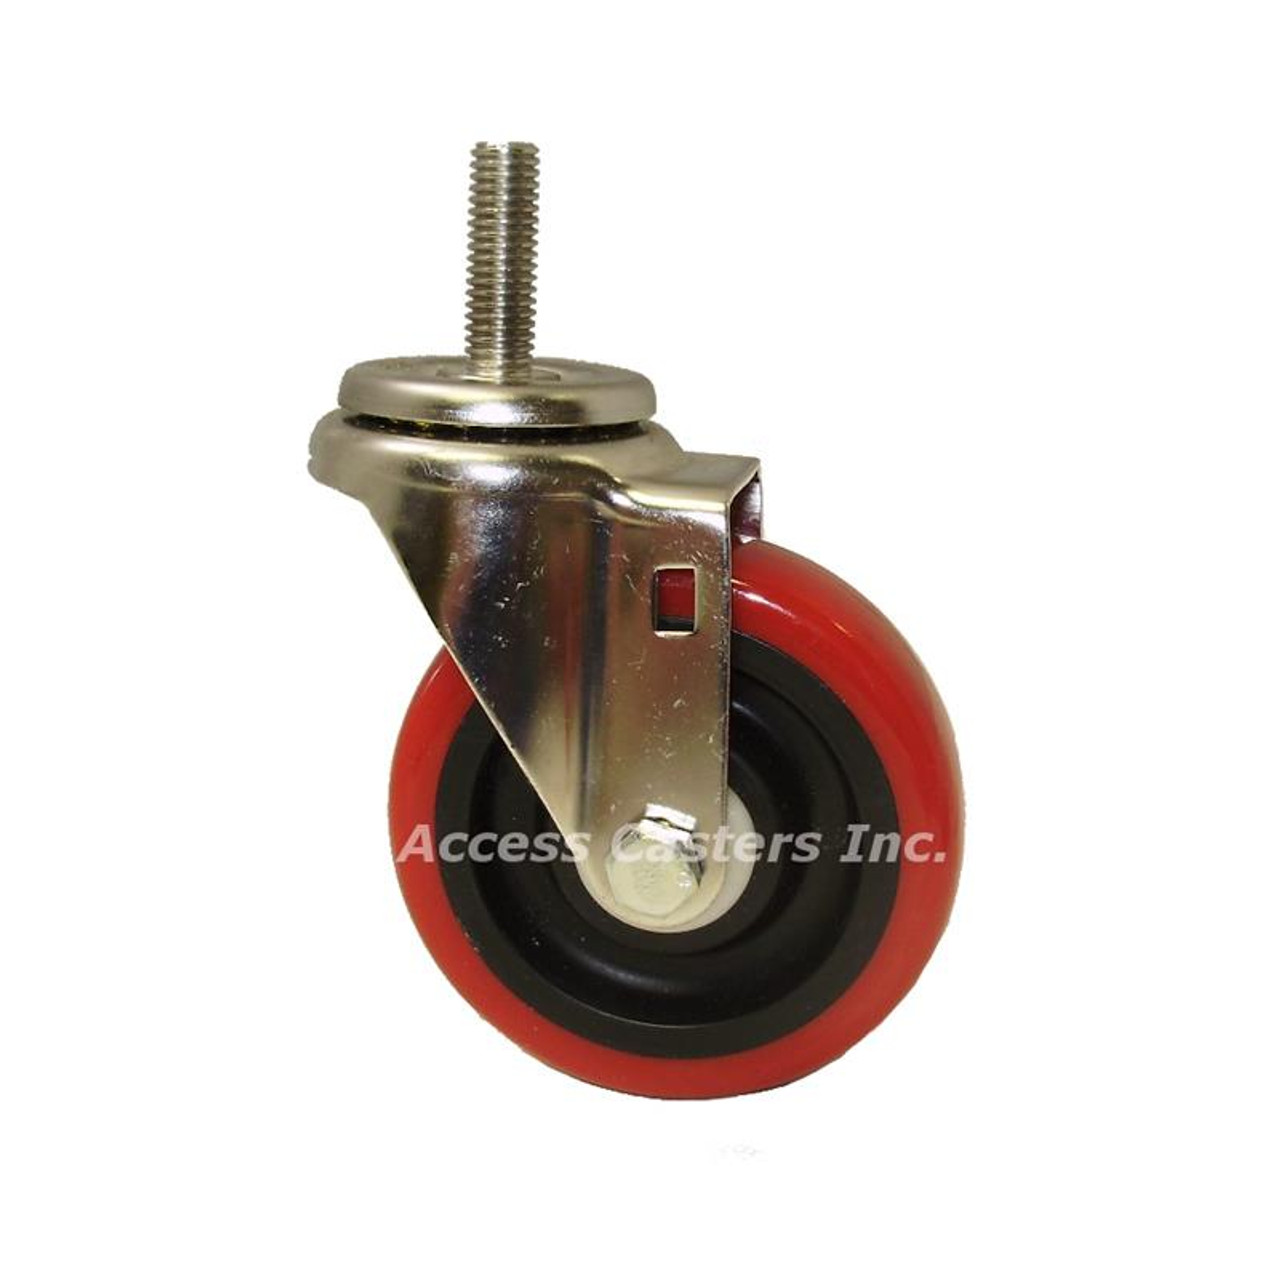 3DXSSPRBS 3" Stainless Stem Caster, Red on Black Poly Wheel